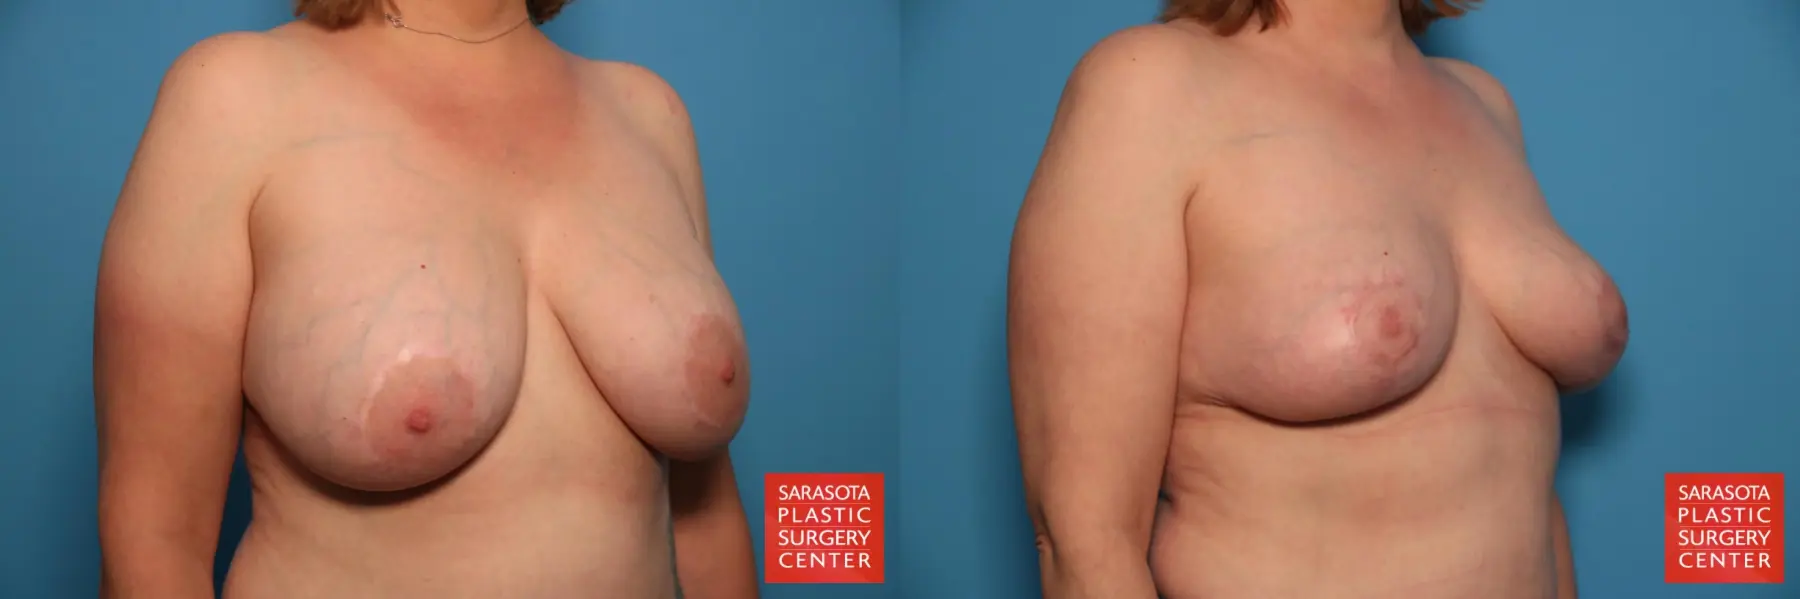 Breast Implant Removal With Lift: Patient 3 - Before and After 2